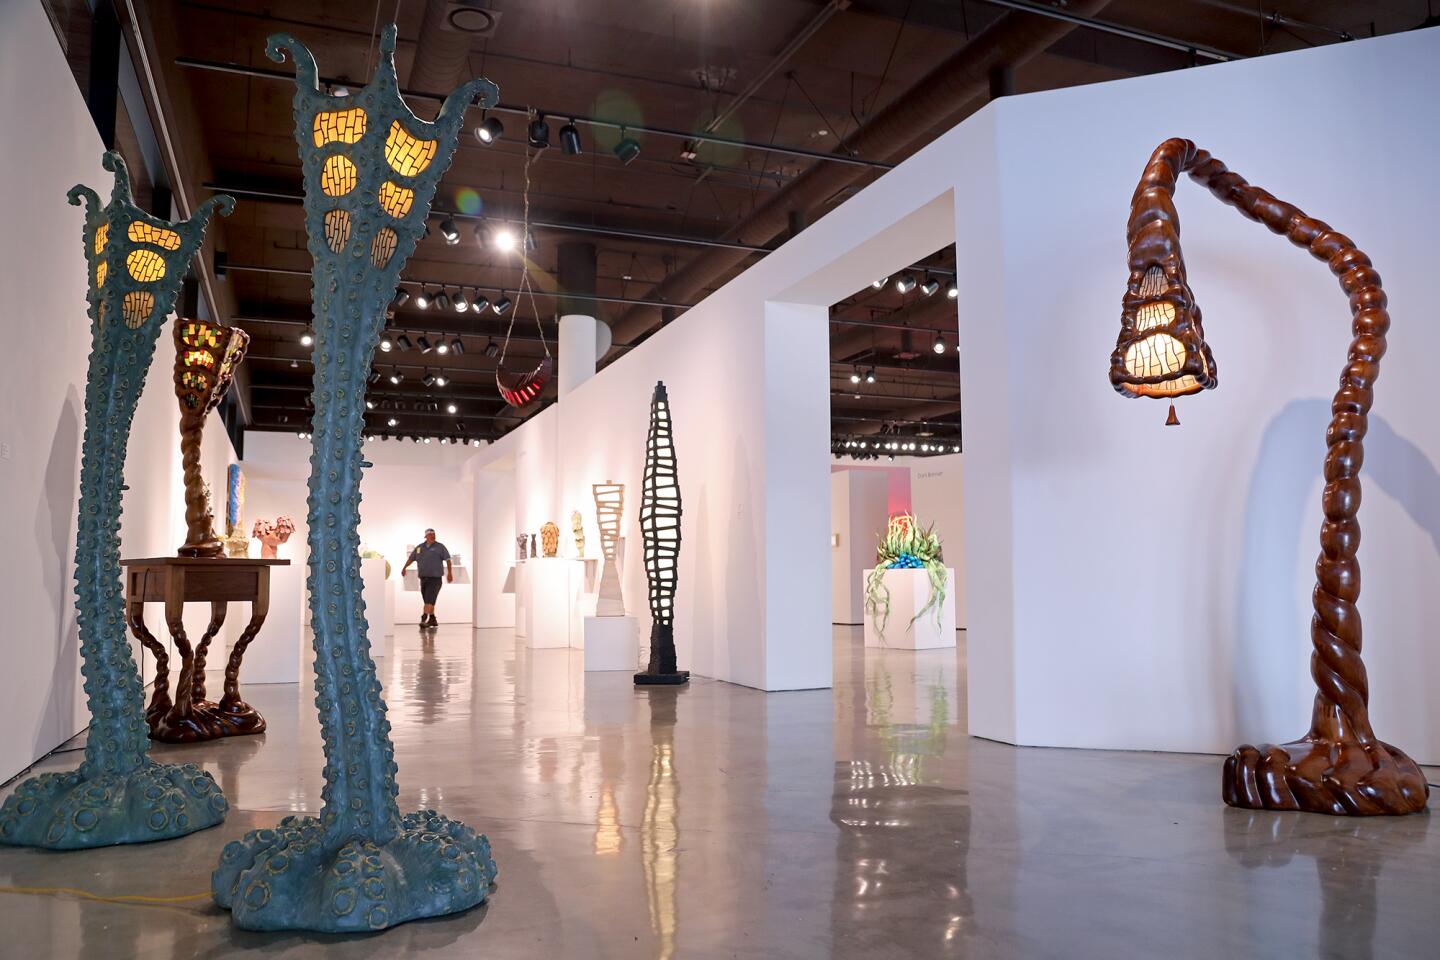 Octo Lamps, 2016, left, and Bent Lily Floor Lamp, 2007, far right, by Ashoke Chhabra.